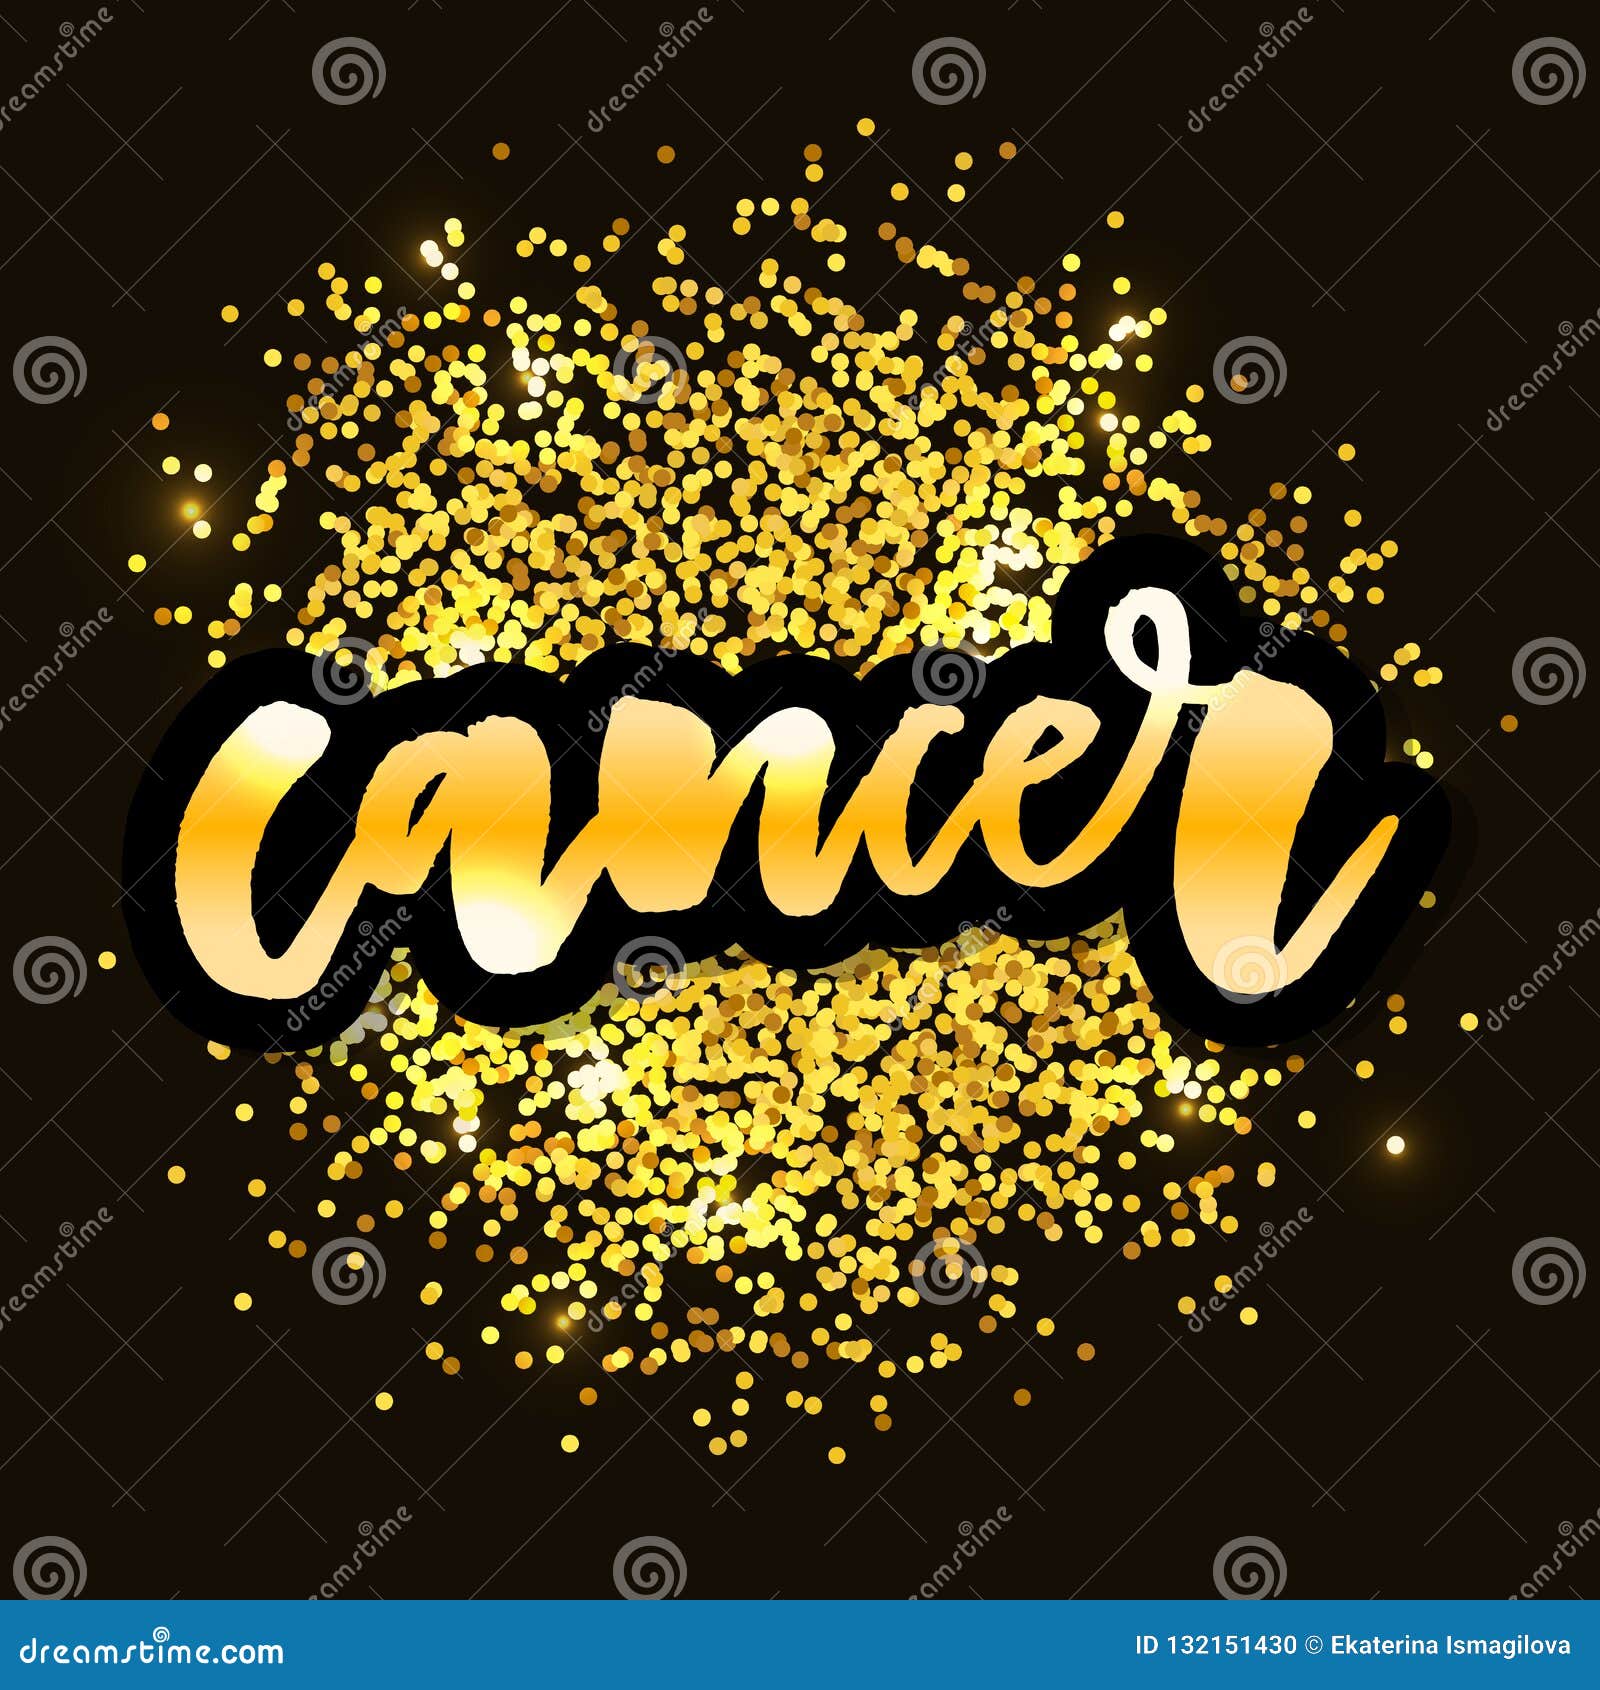 Cancer Lettering Calligraphy Brush Text Horoscope Zodiac Sign ...